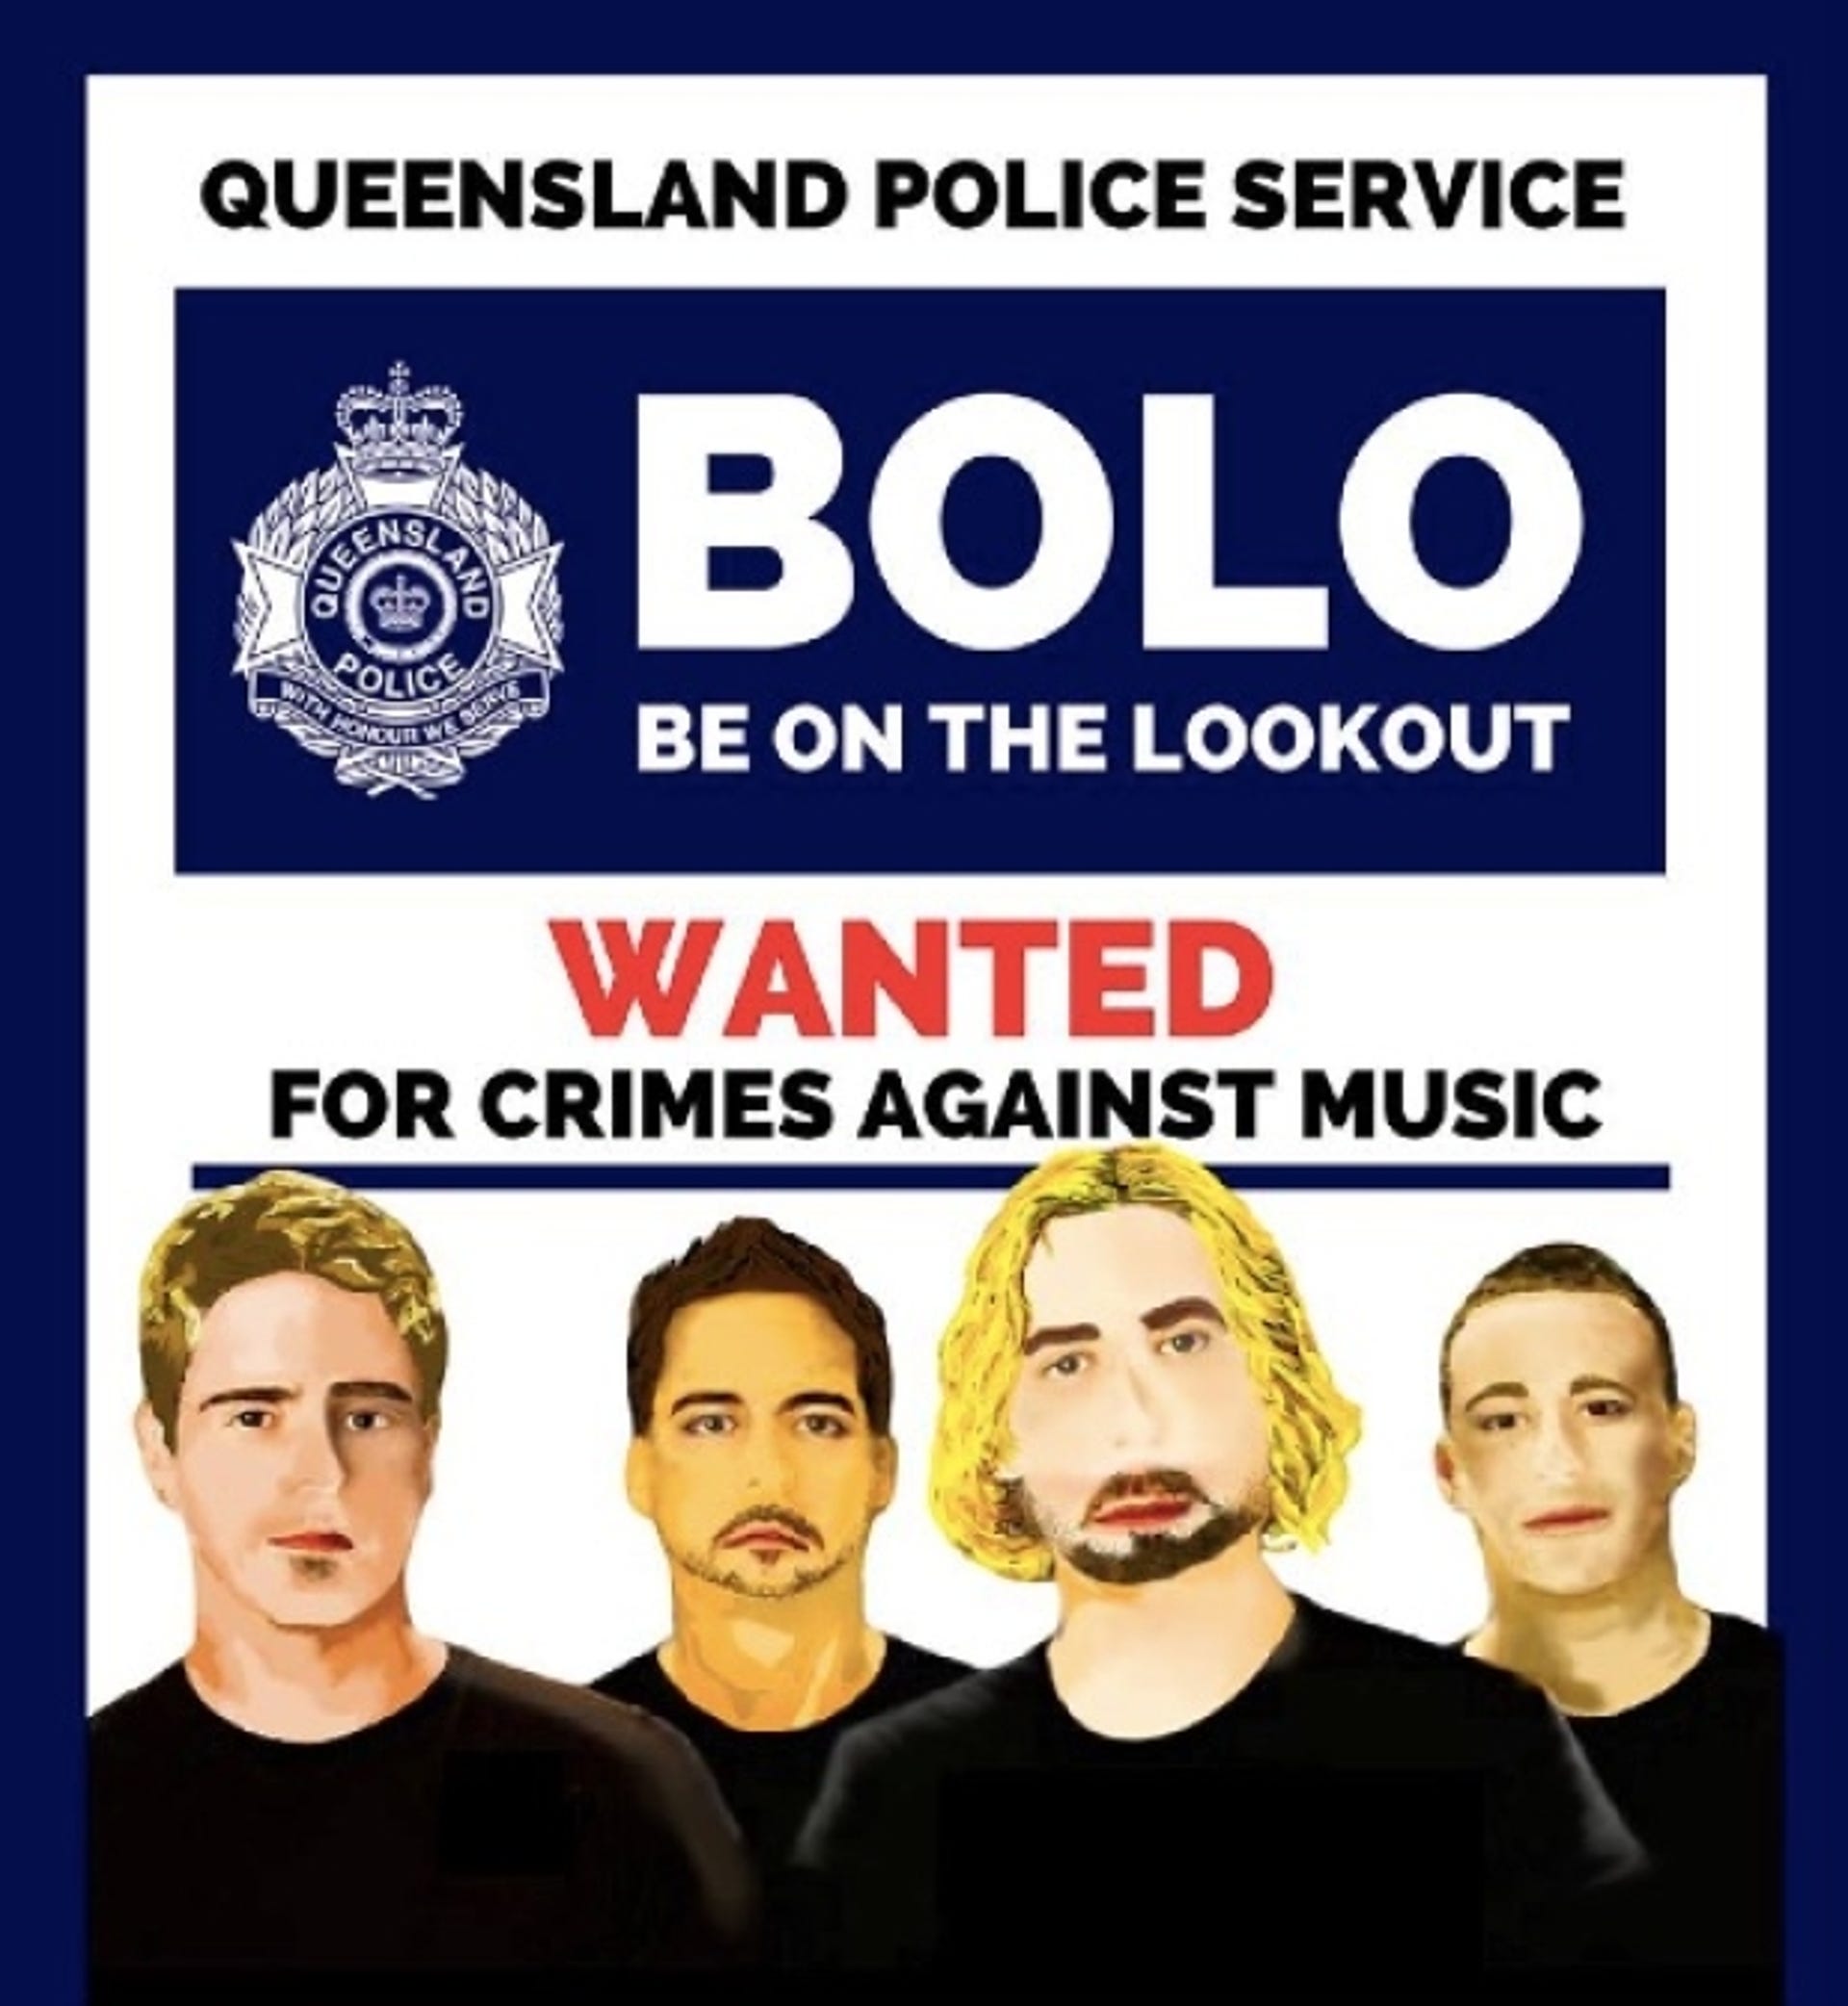 The Nickelback-hating poster created by the Queensland Police in Australia.